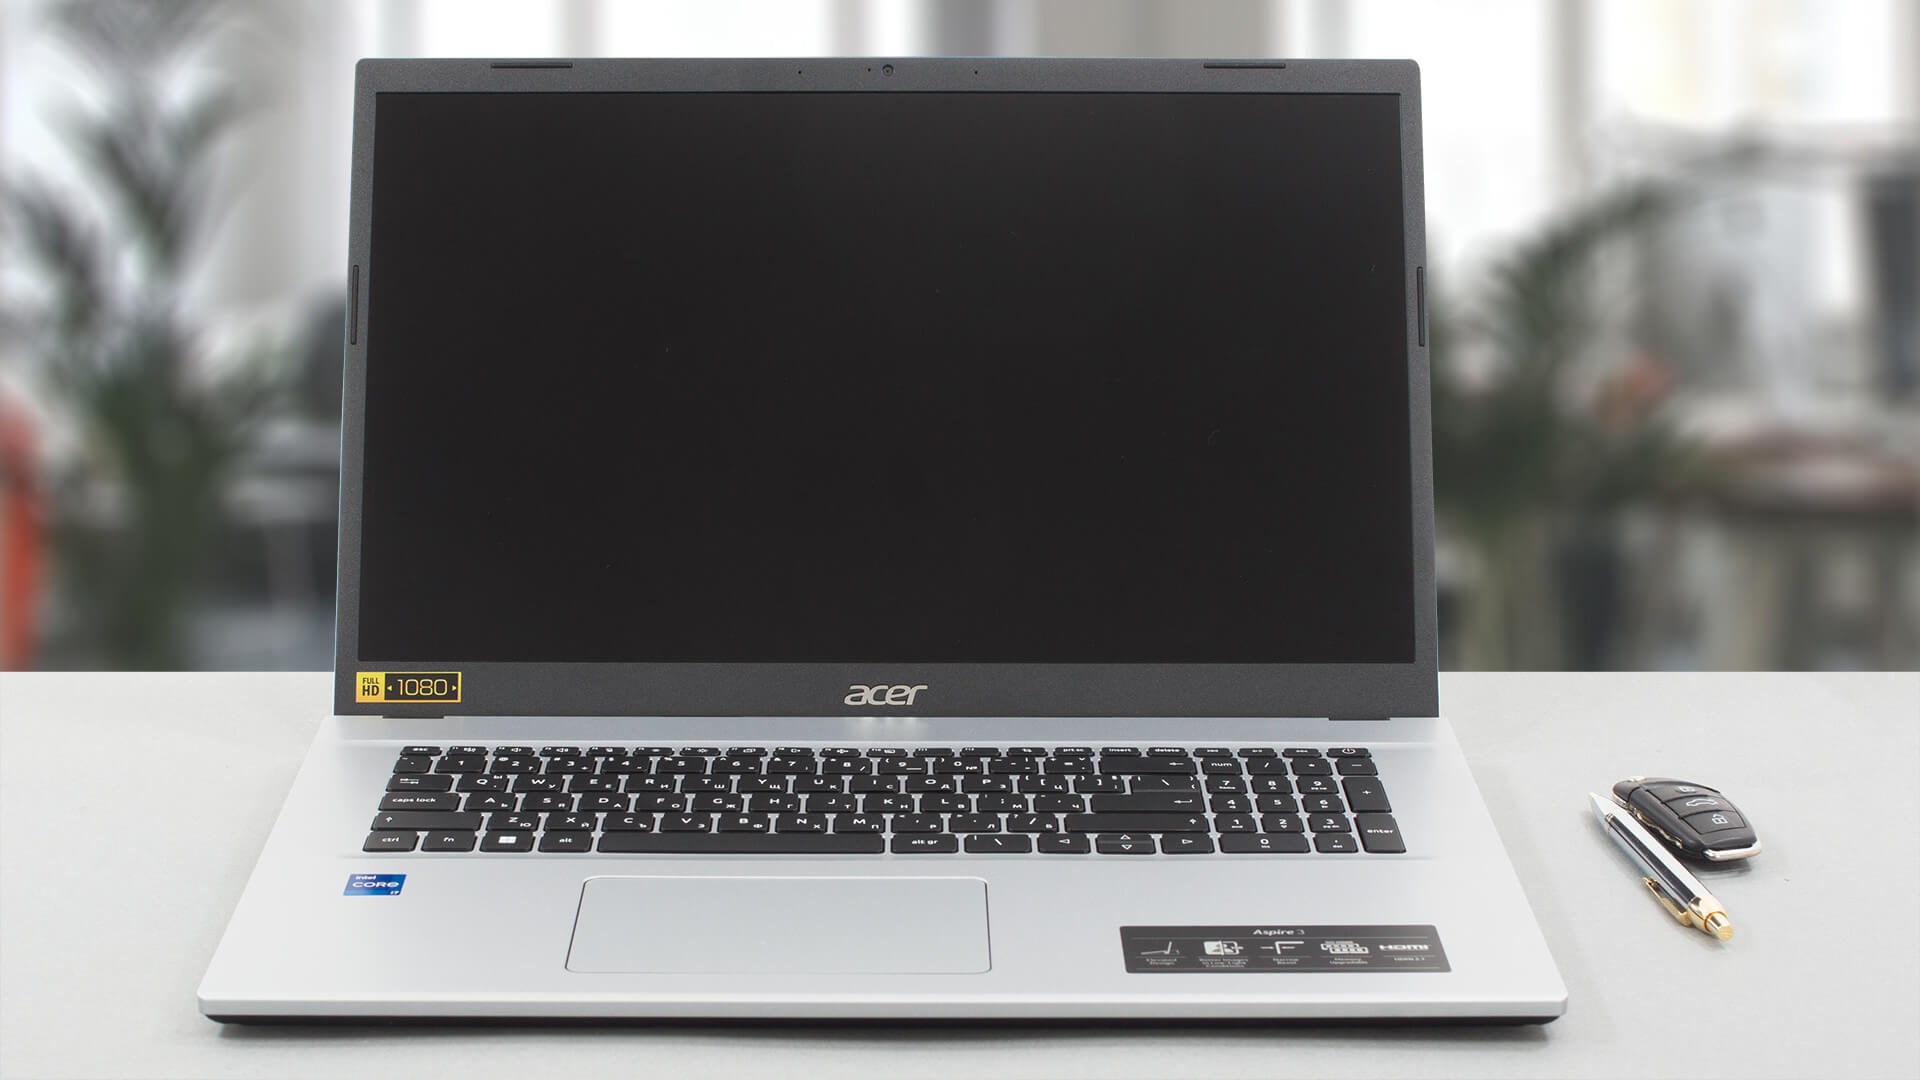 Acer Aspire 3 (A317-54) review - affordable, powerful, but unrefined